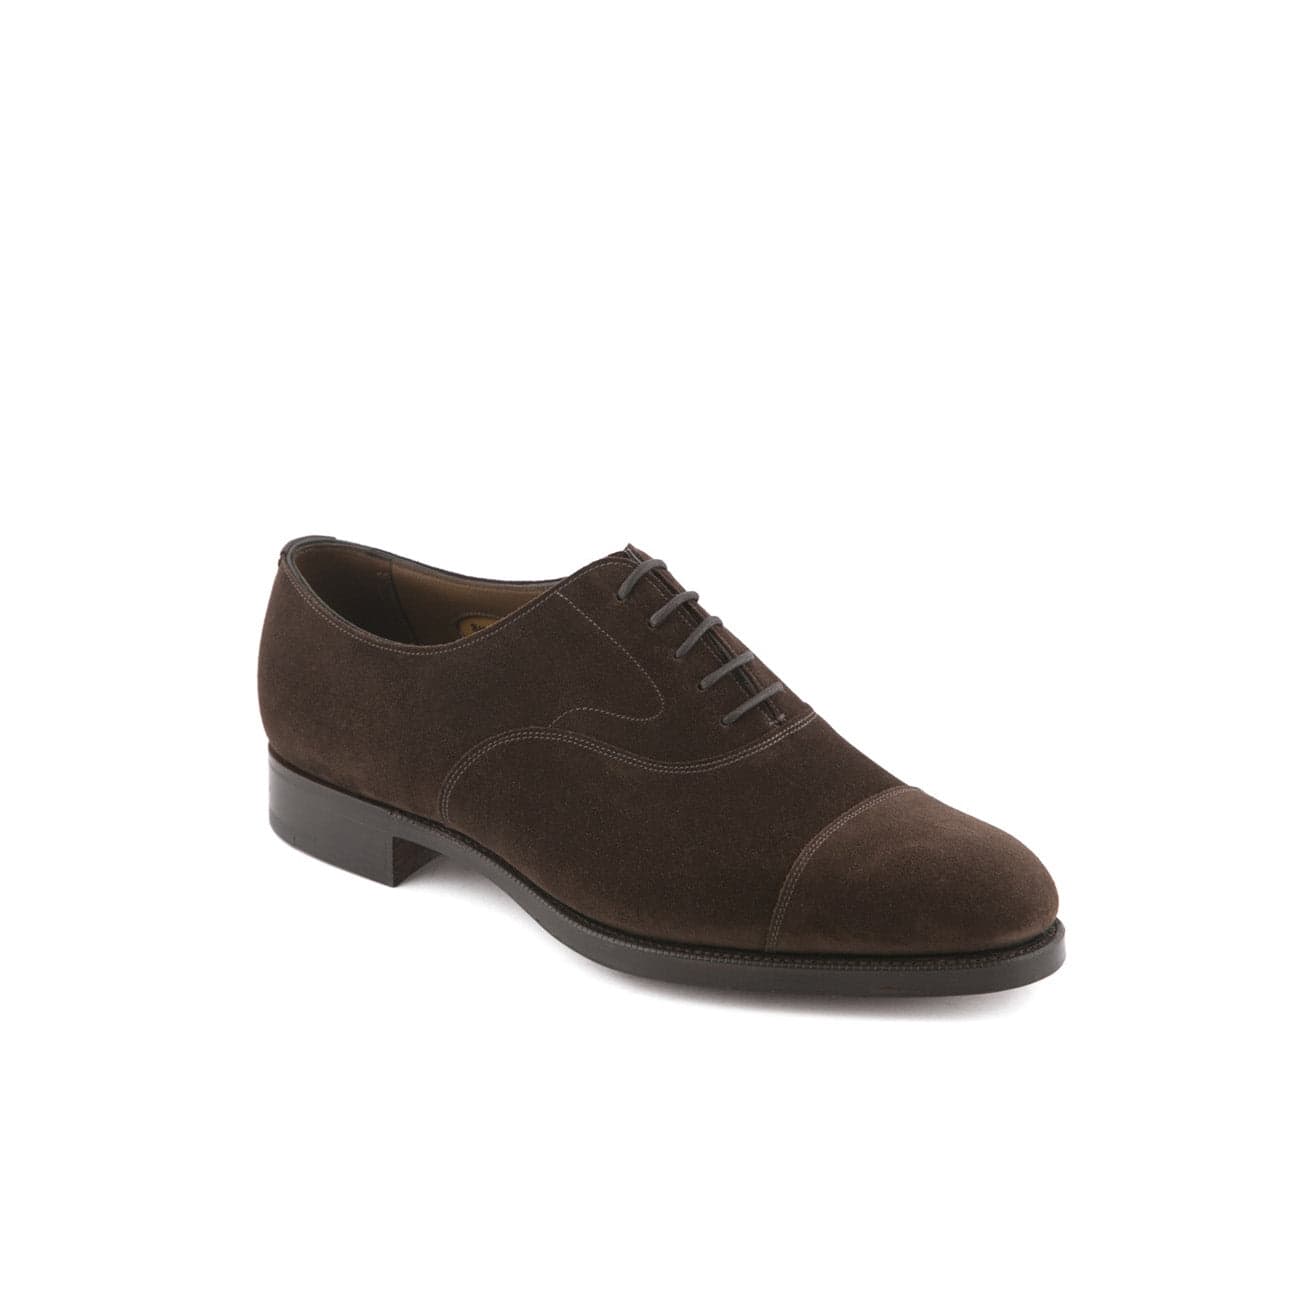 Chelsea Mocca Suede Oxford Shoe